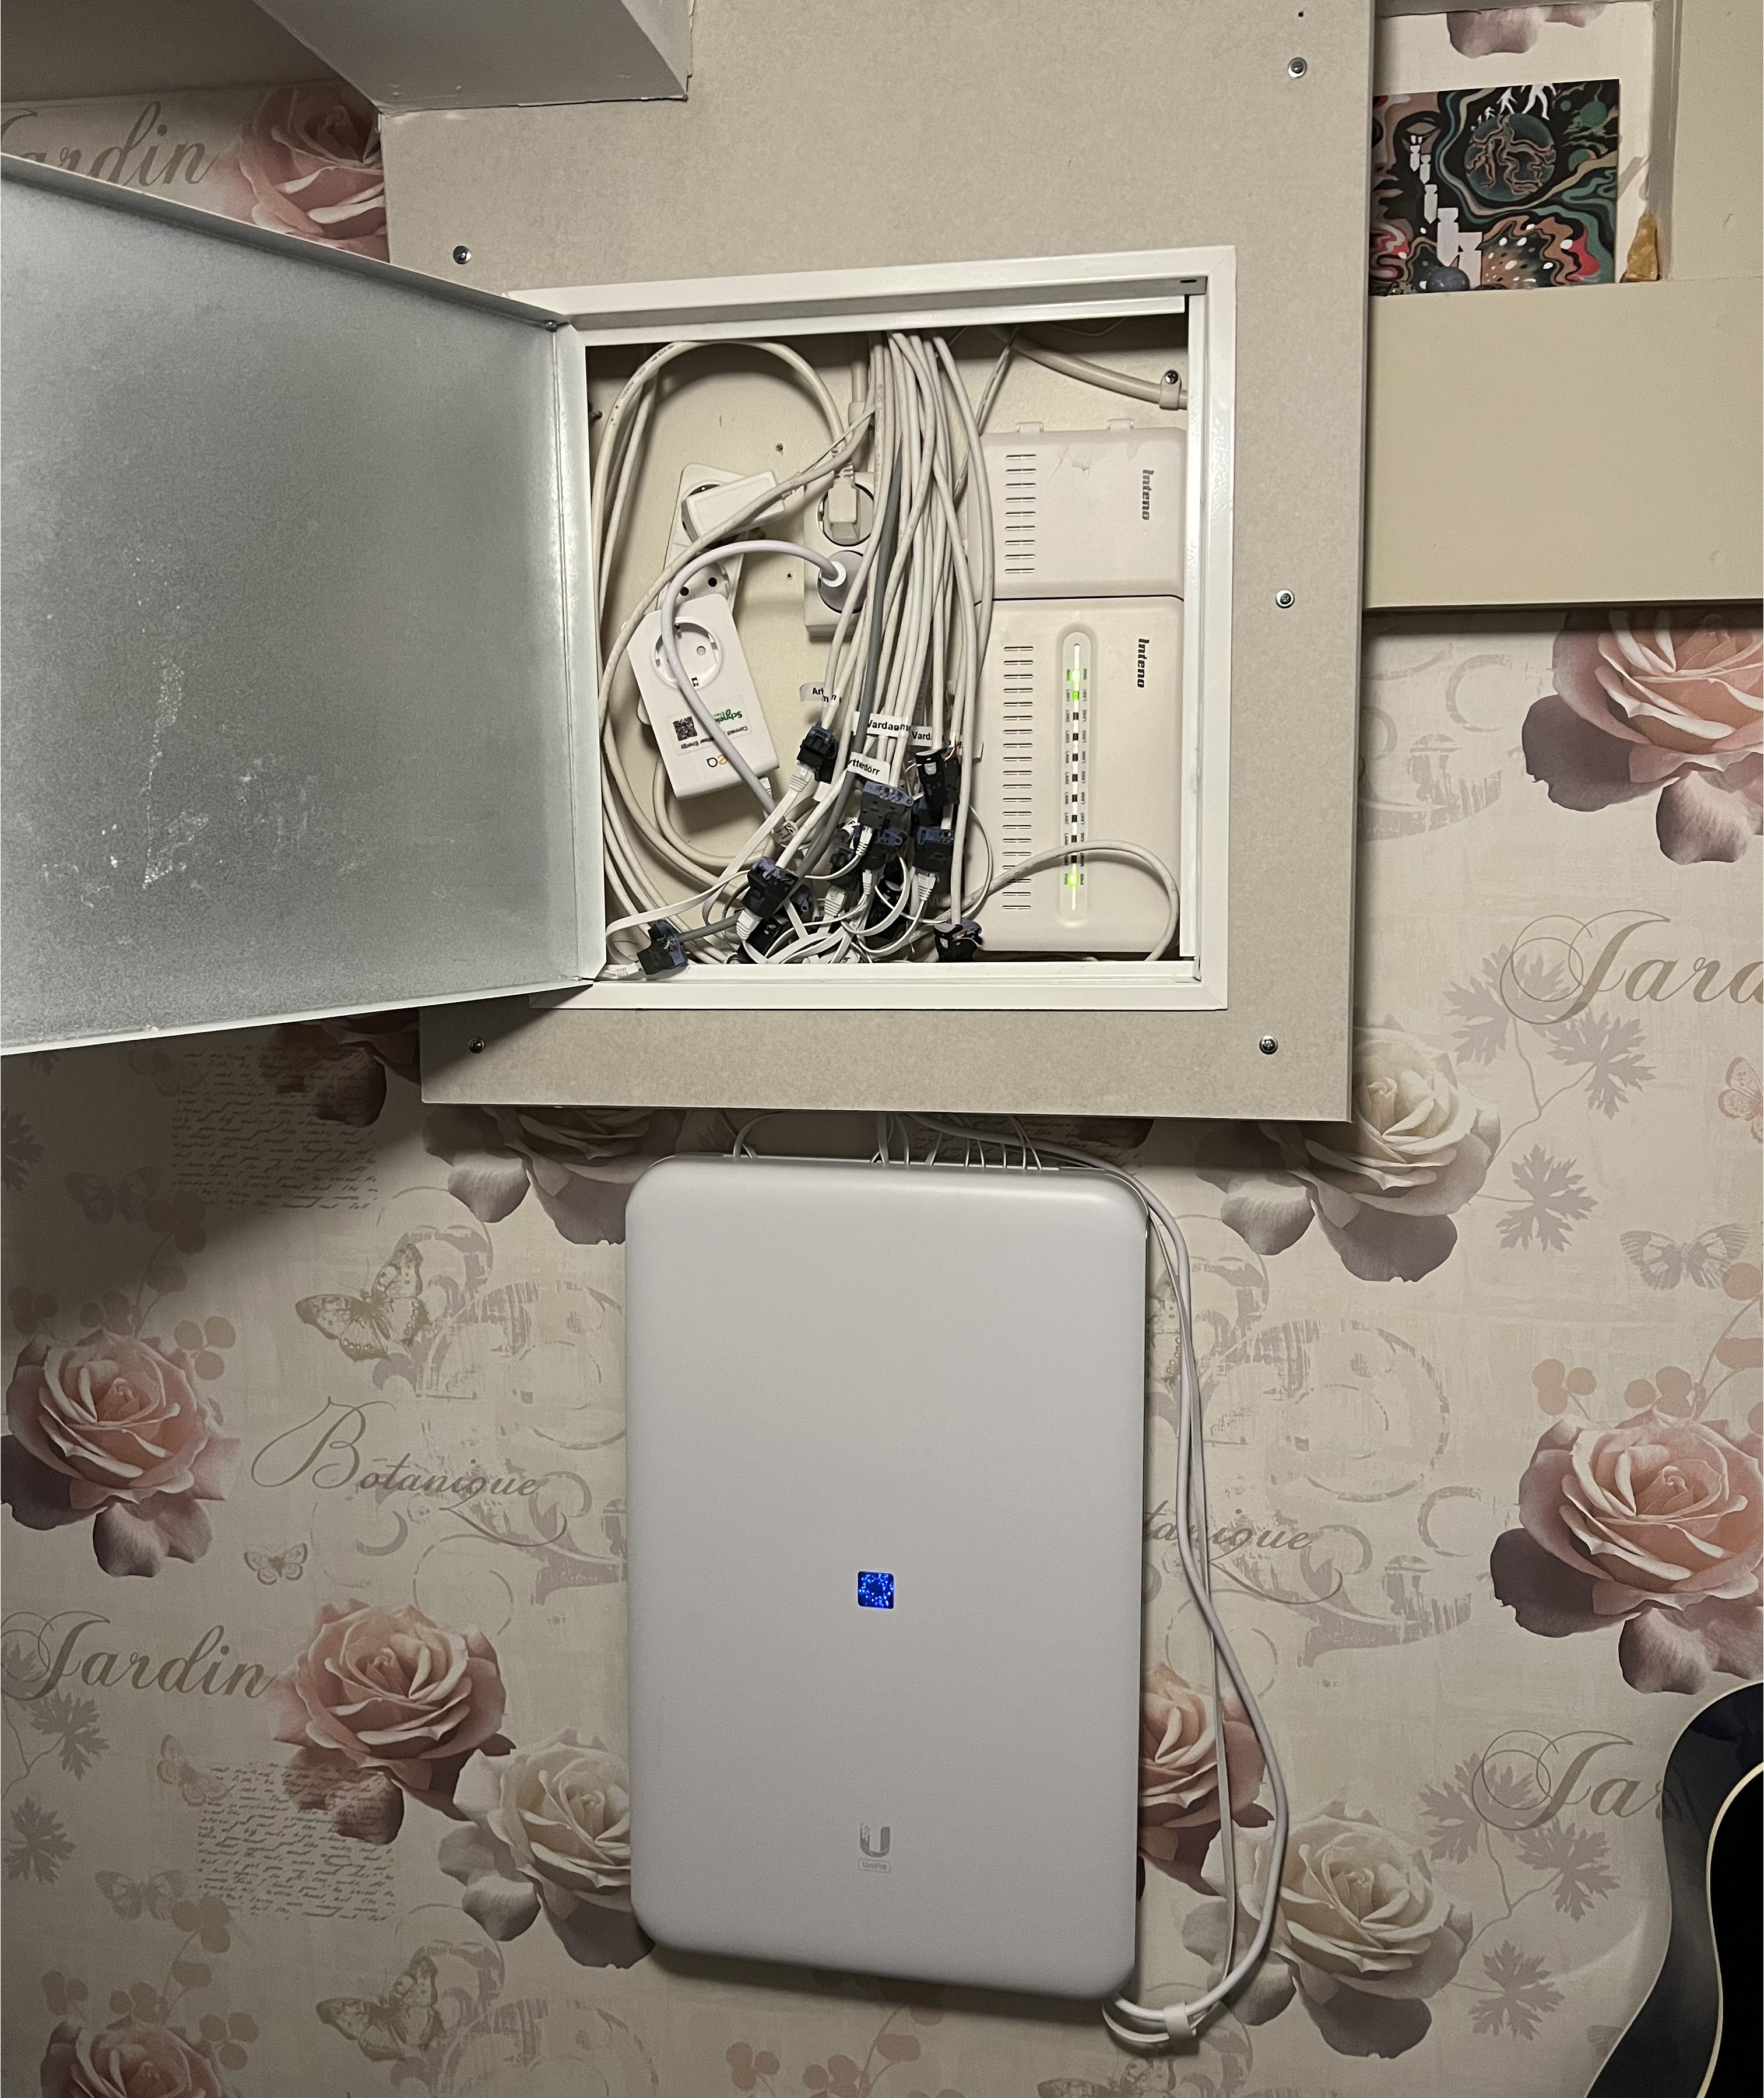 Unify Dream Wall beneath cable box mounted on wall